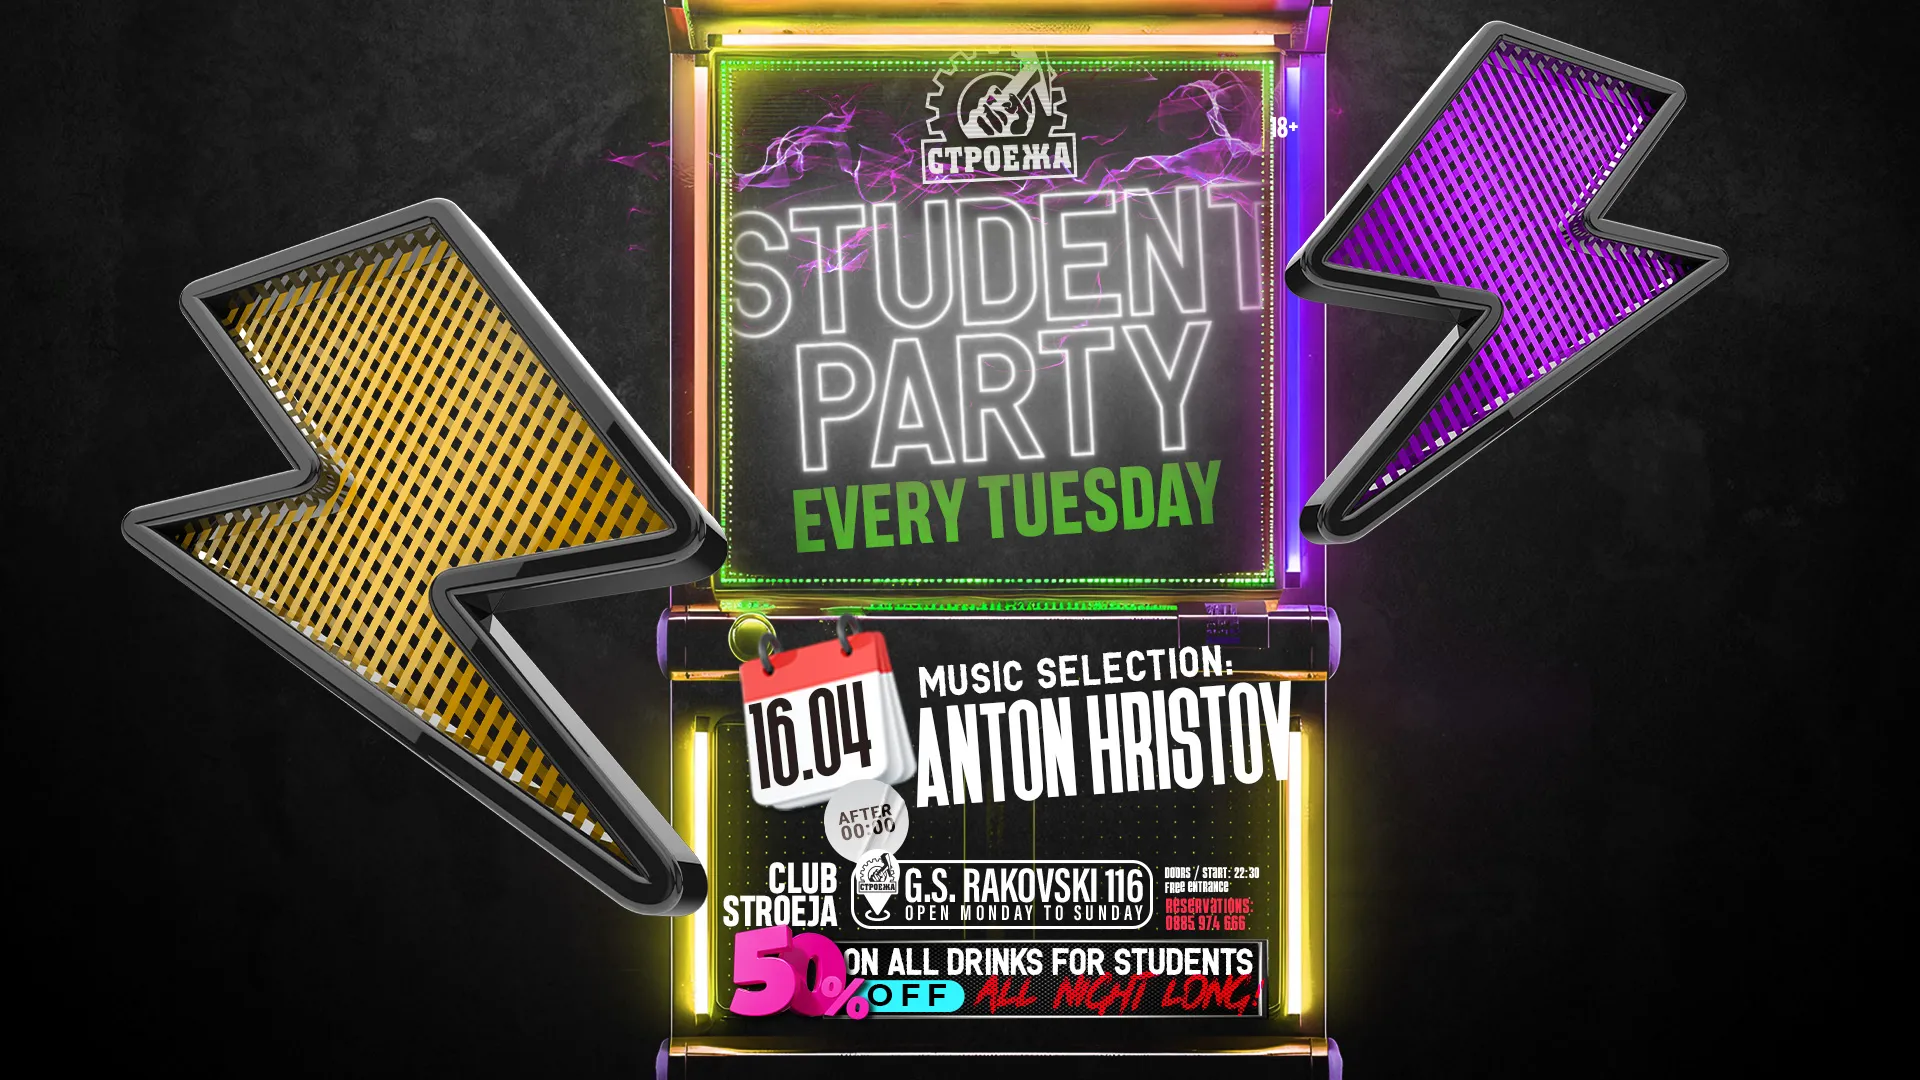 STUDENT PARTY - EVERY TUESDAY